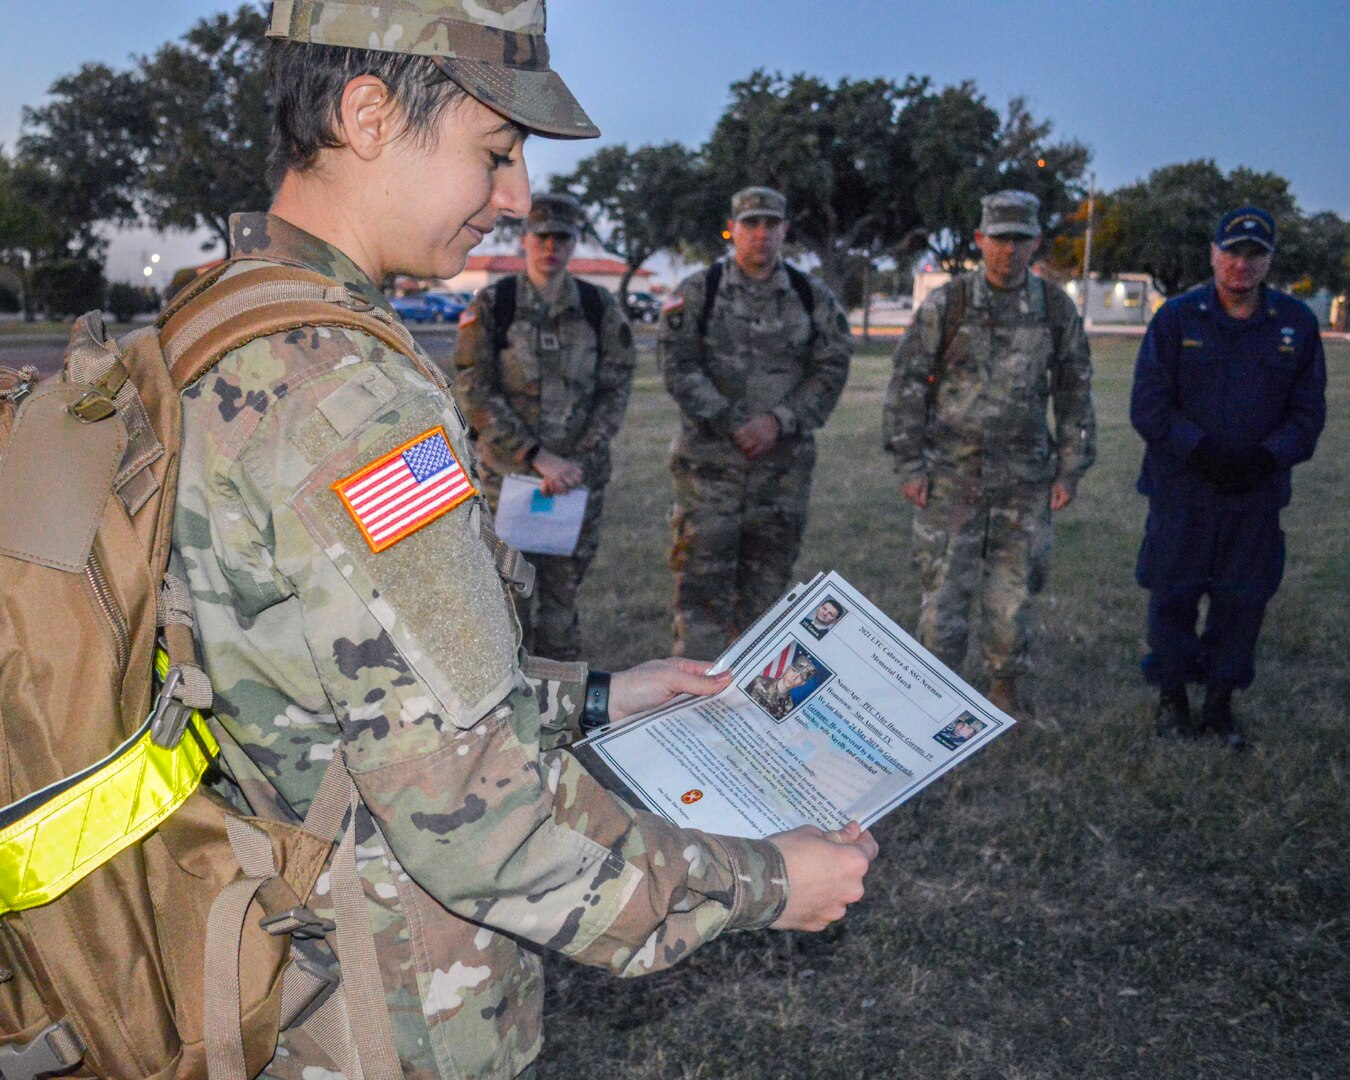 Army Capt. Leanne Bishara, clinical psychology intern, reads the biography of a fallen service member during a memorial march